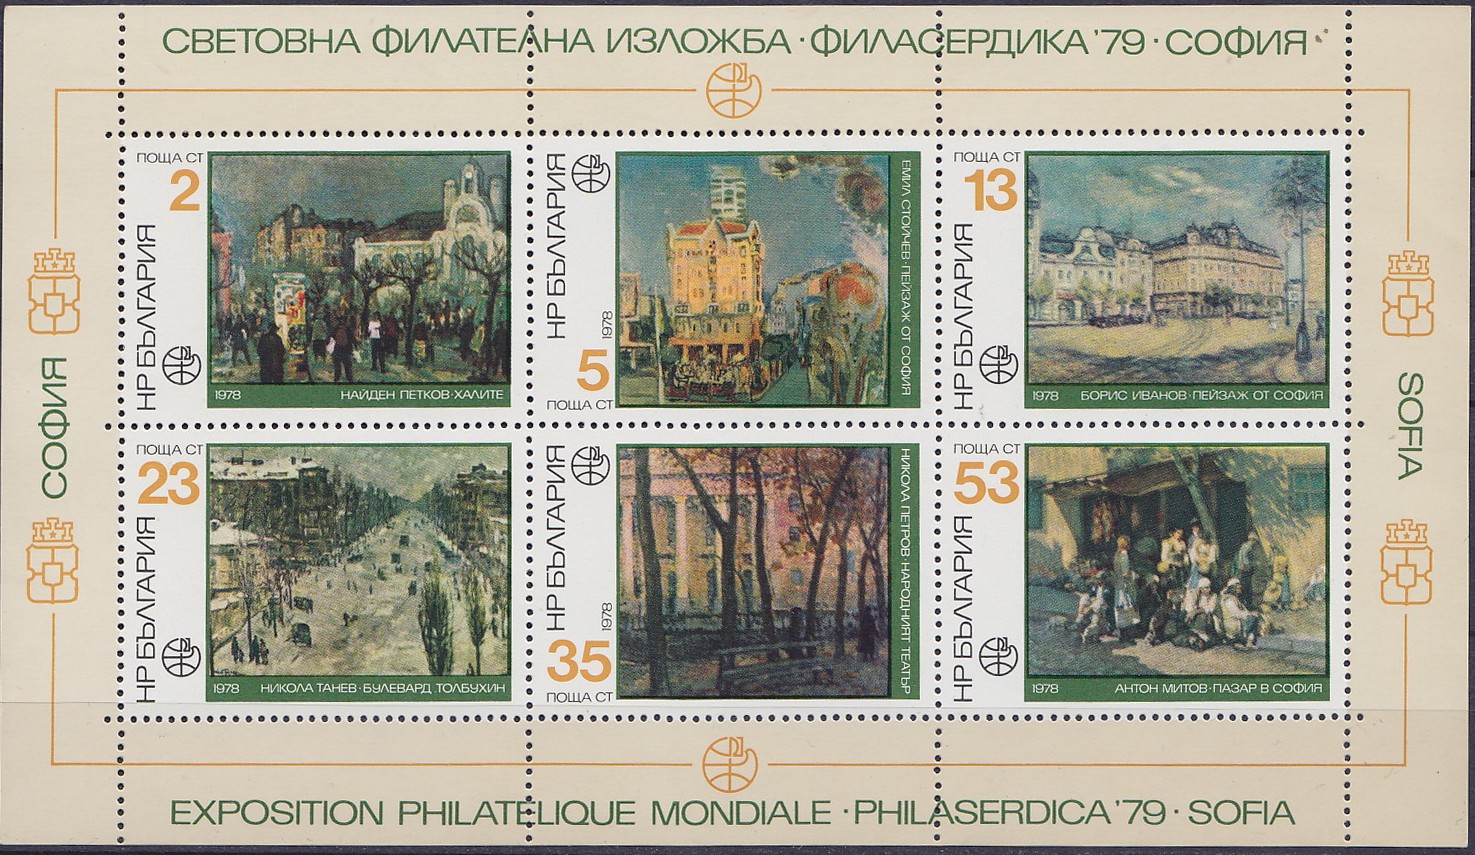 MINIMUM-SIZE-OF-A-BICYCLE-ON-A-BICYCLE-STAMP-Bulgaria-sheet